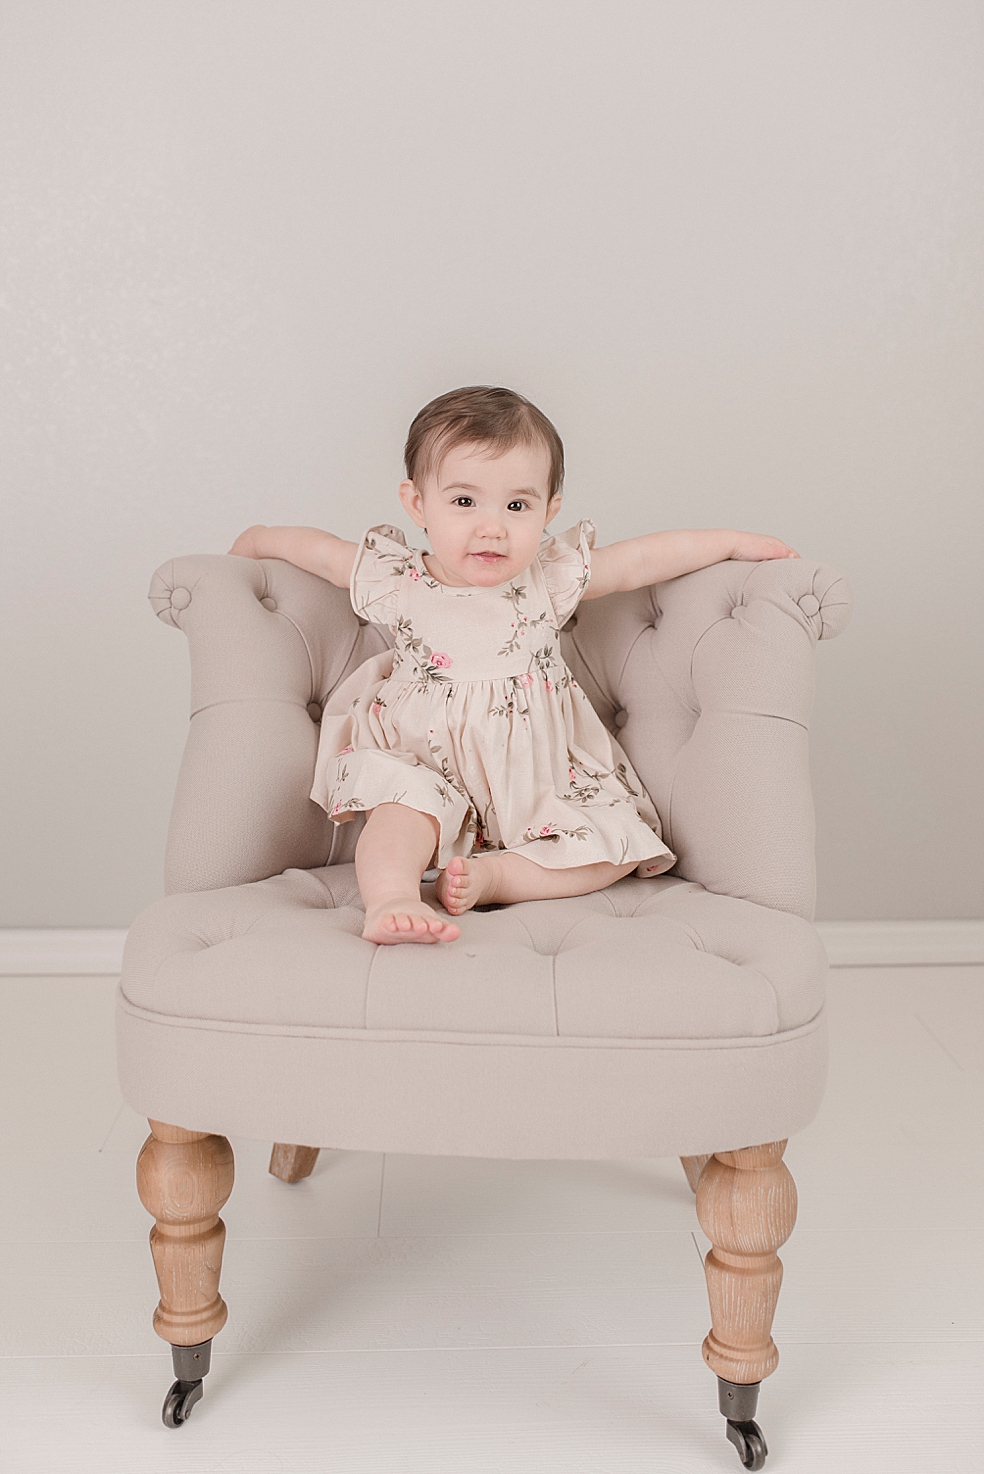 Baby girl in a floral dress sitting in a gray chair | Photo by Jessica Lee Photography